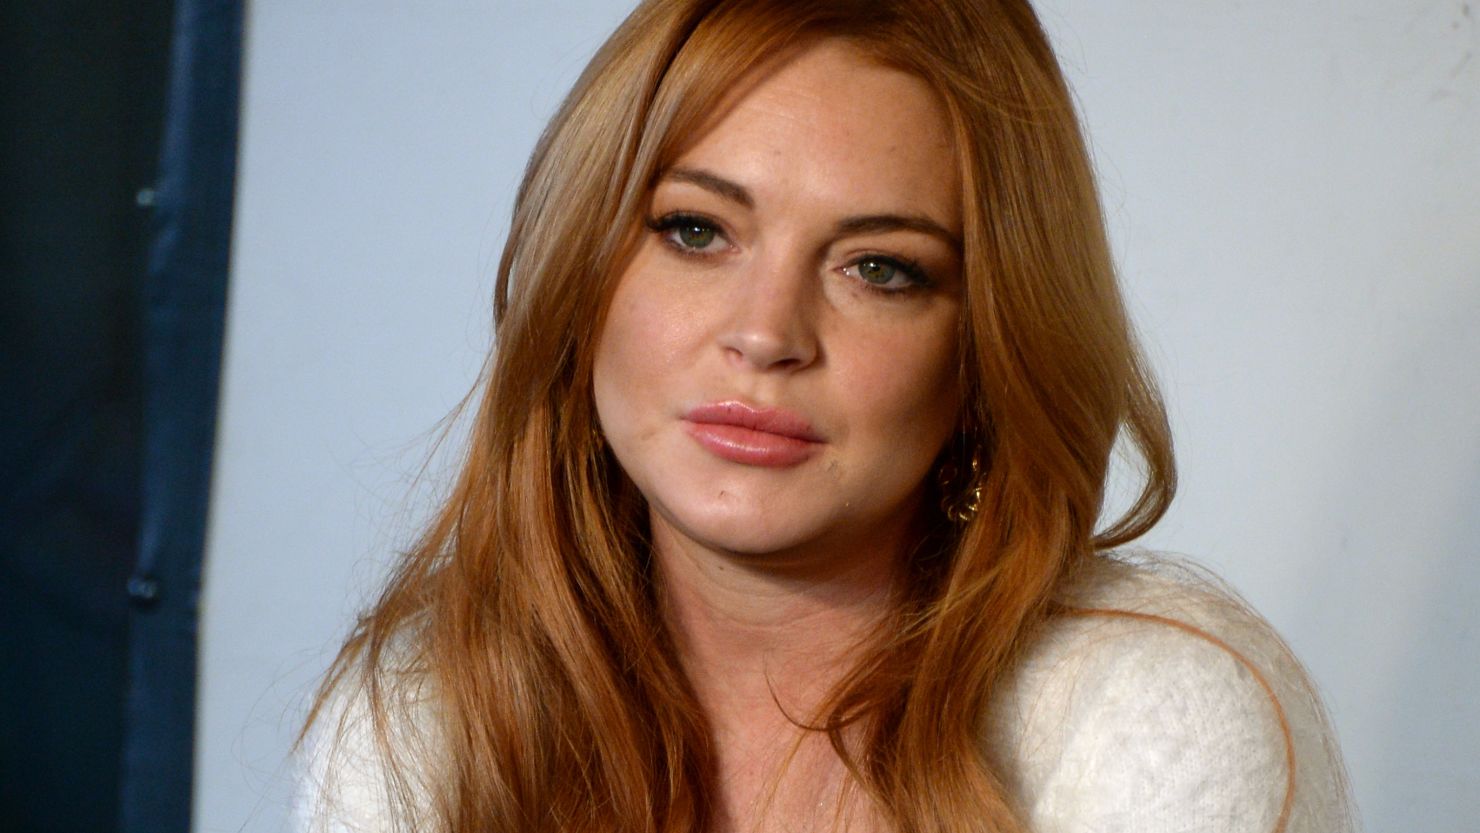 Lindsay Lohan attends a press conference during the Sundance Film Festival in January 2014.